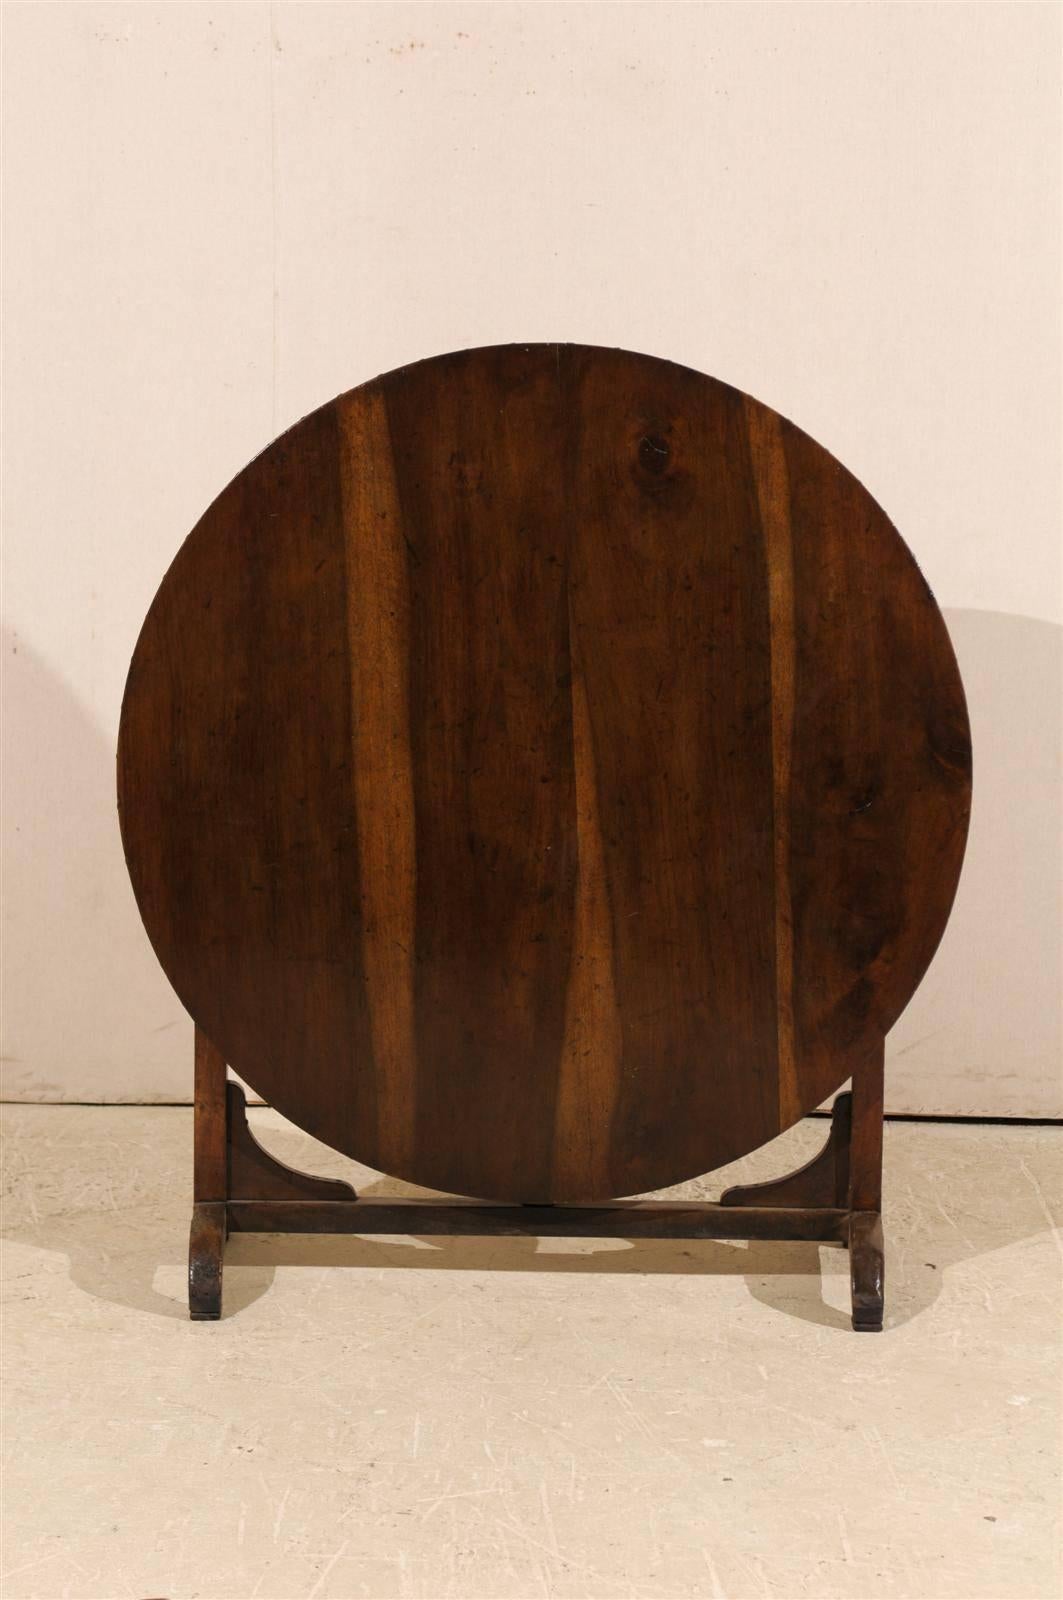 A French wine tasting table. In the typical tradition, this French wine tasting table features a tilt-top over butterfly wedges. Made of solid walnut, this table has a great patina and wood grain. The wood on this piece is a nice dark rich red-brown